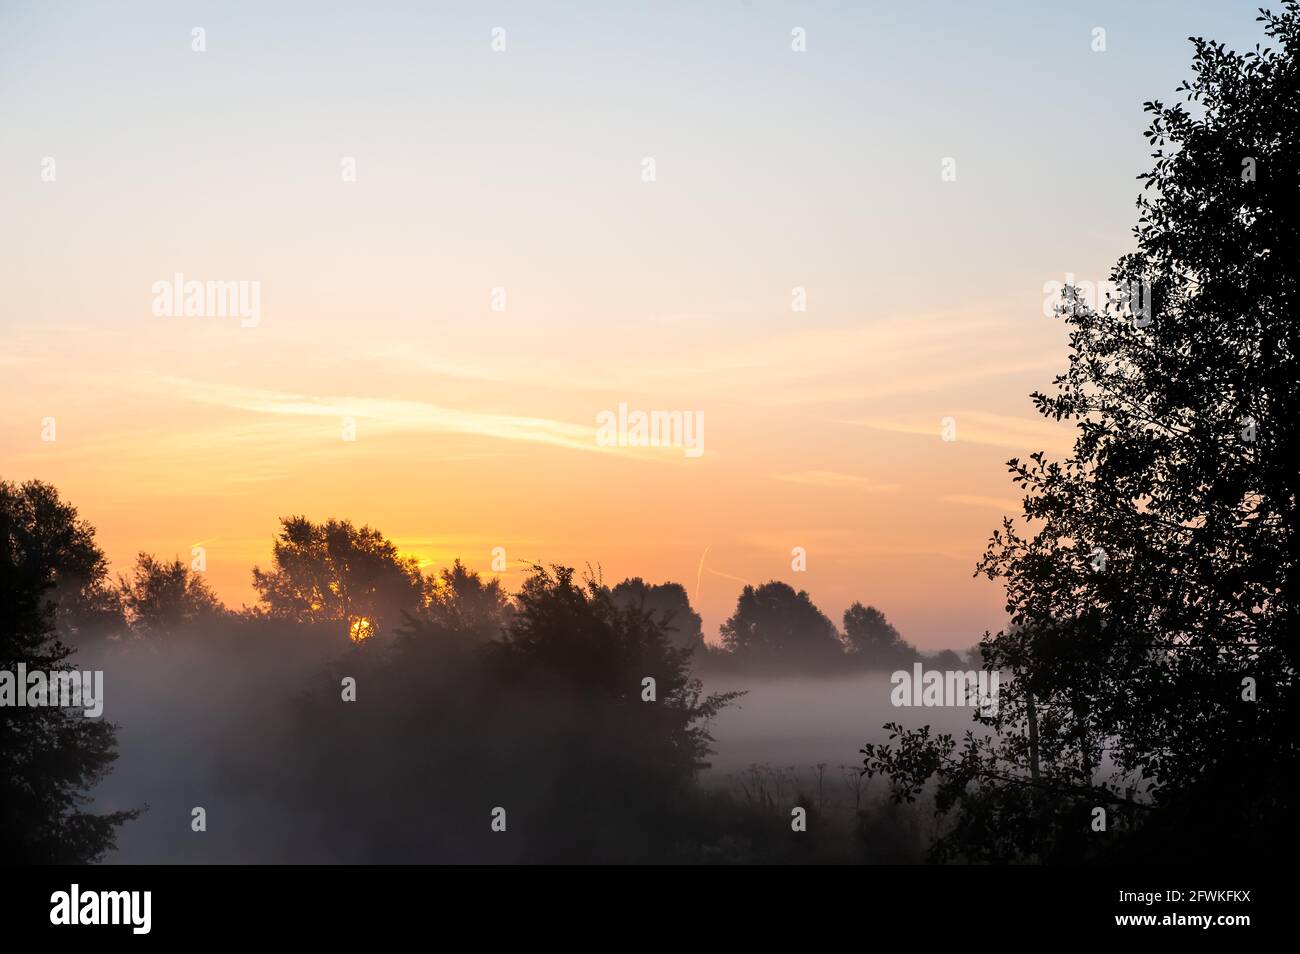 Early morning summer sunrise with mist and trees close to water, river with reflections in calm, beautiful river English landscape Stock Photo